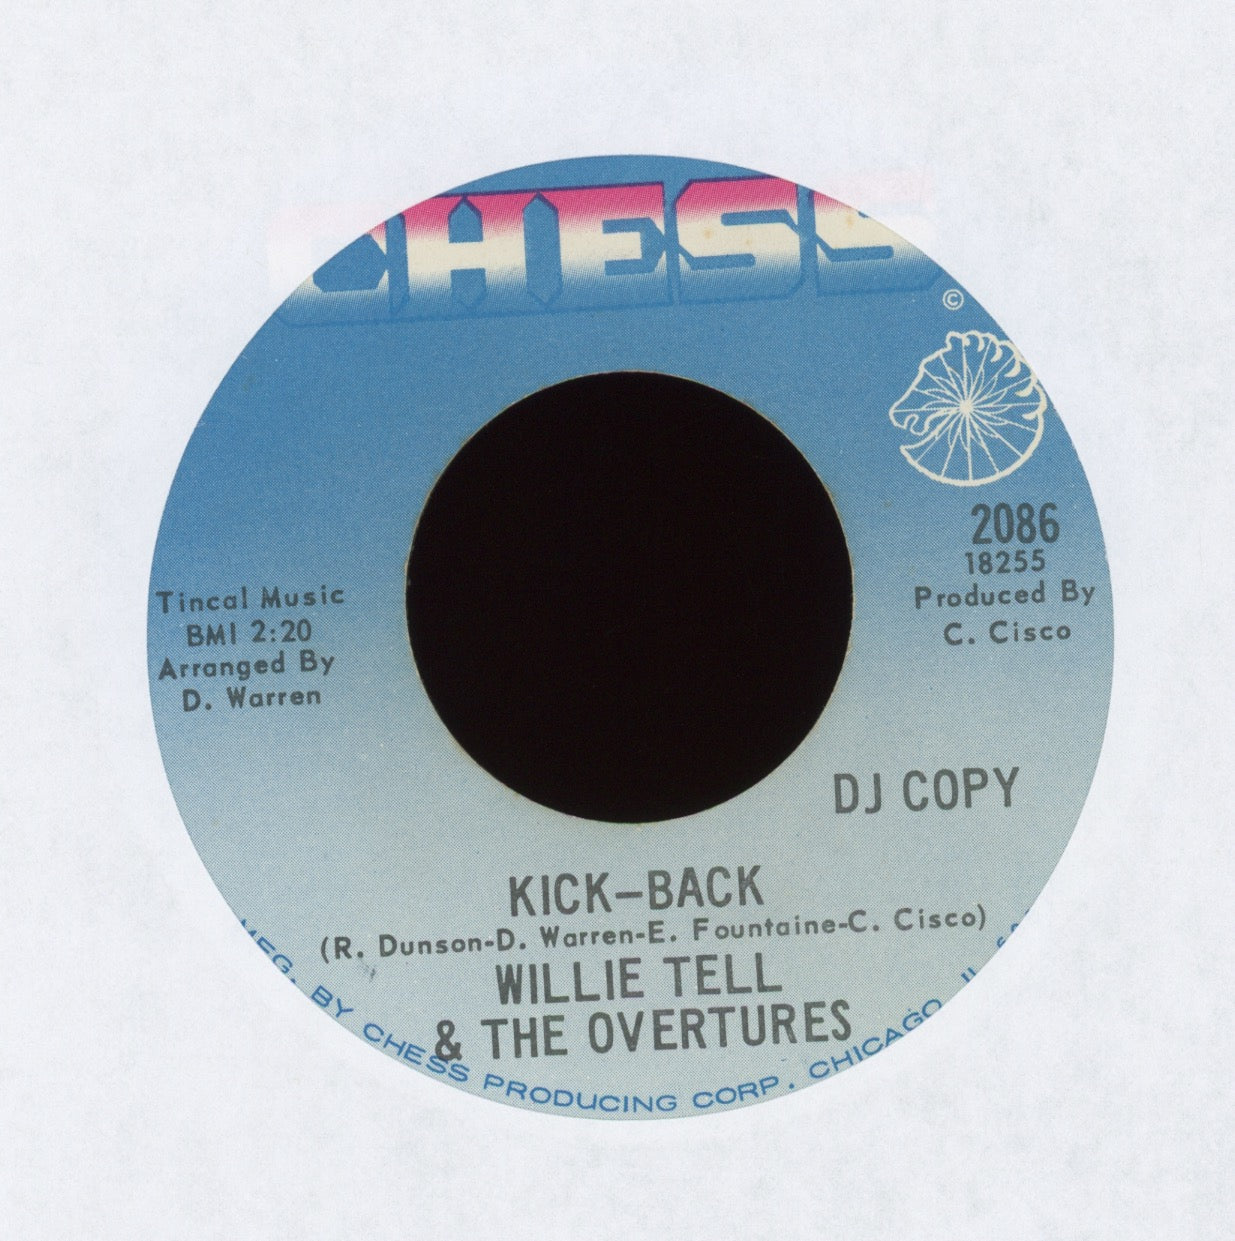 Willie Tell & The Overtures - Kick-Back on Chess Promo Funk 45 Breaks